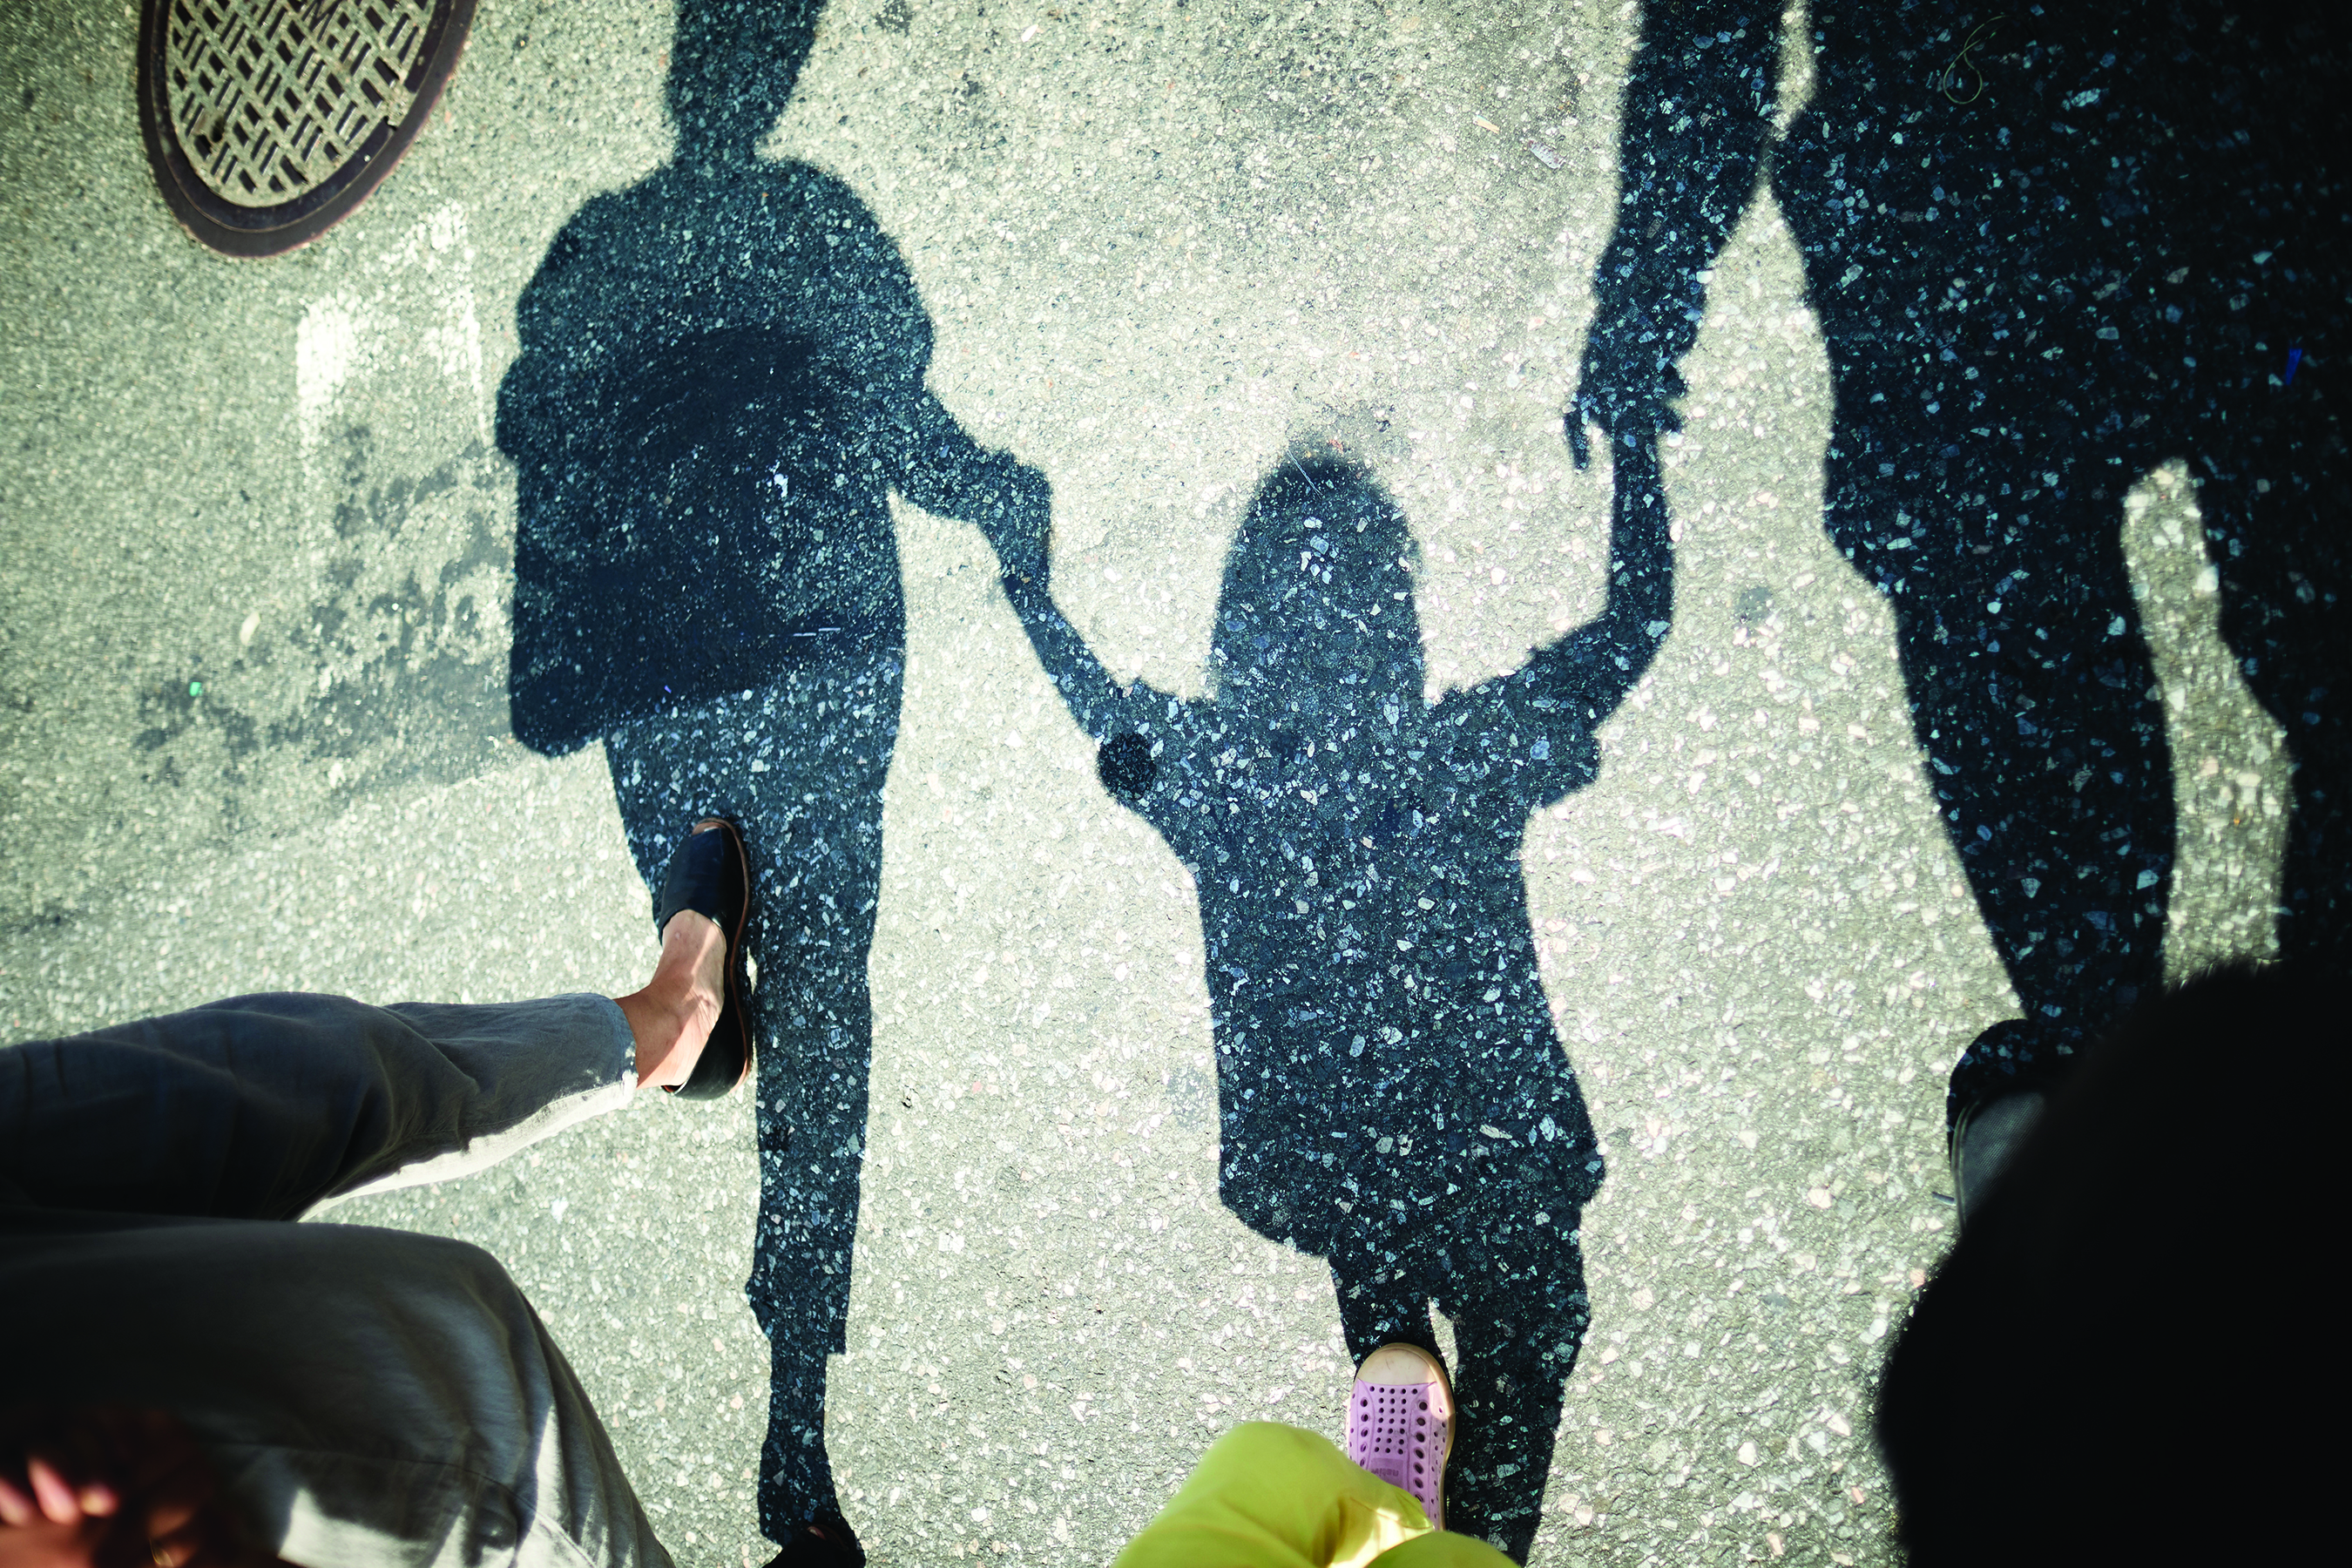 image showing a families shadow while walking.